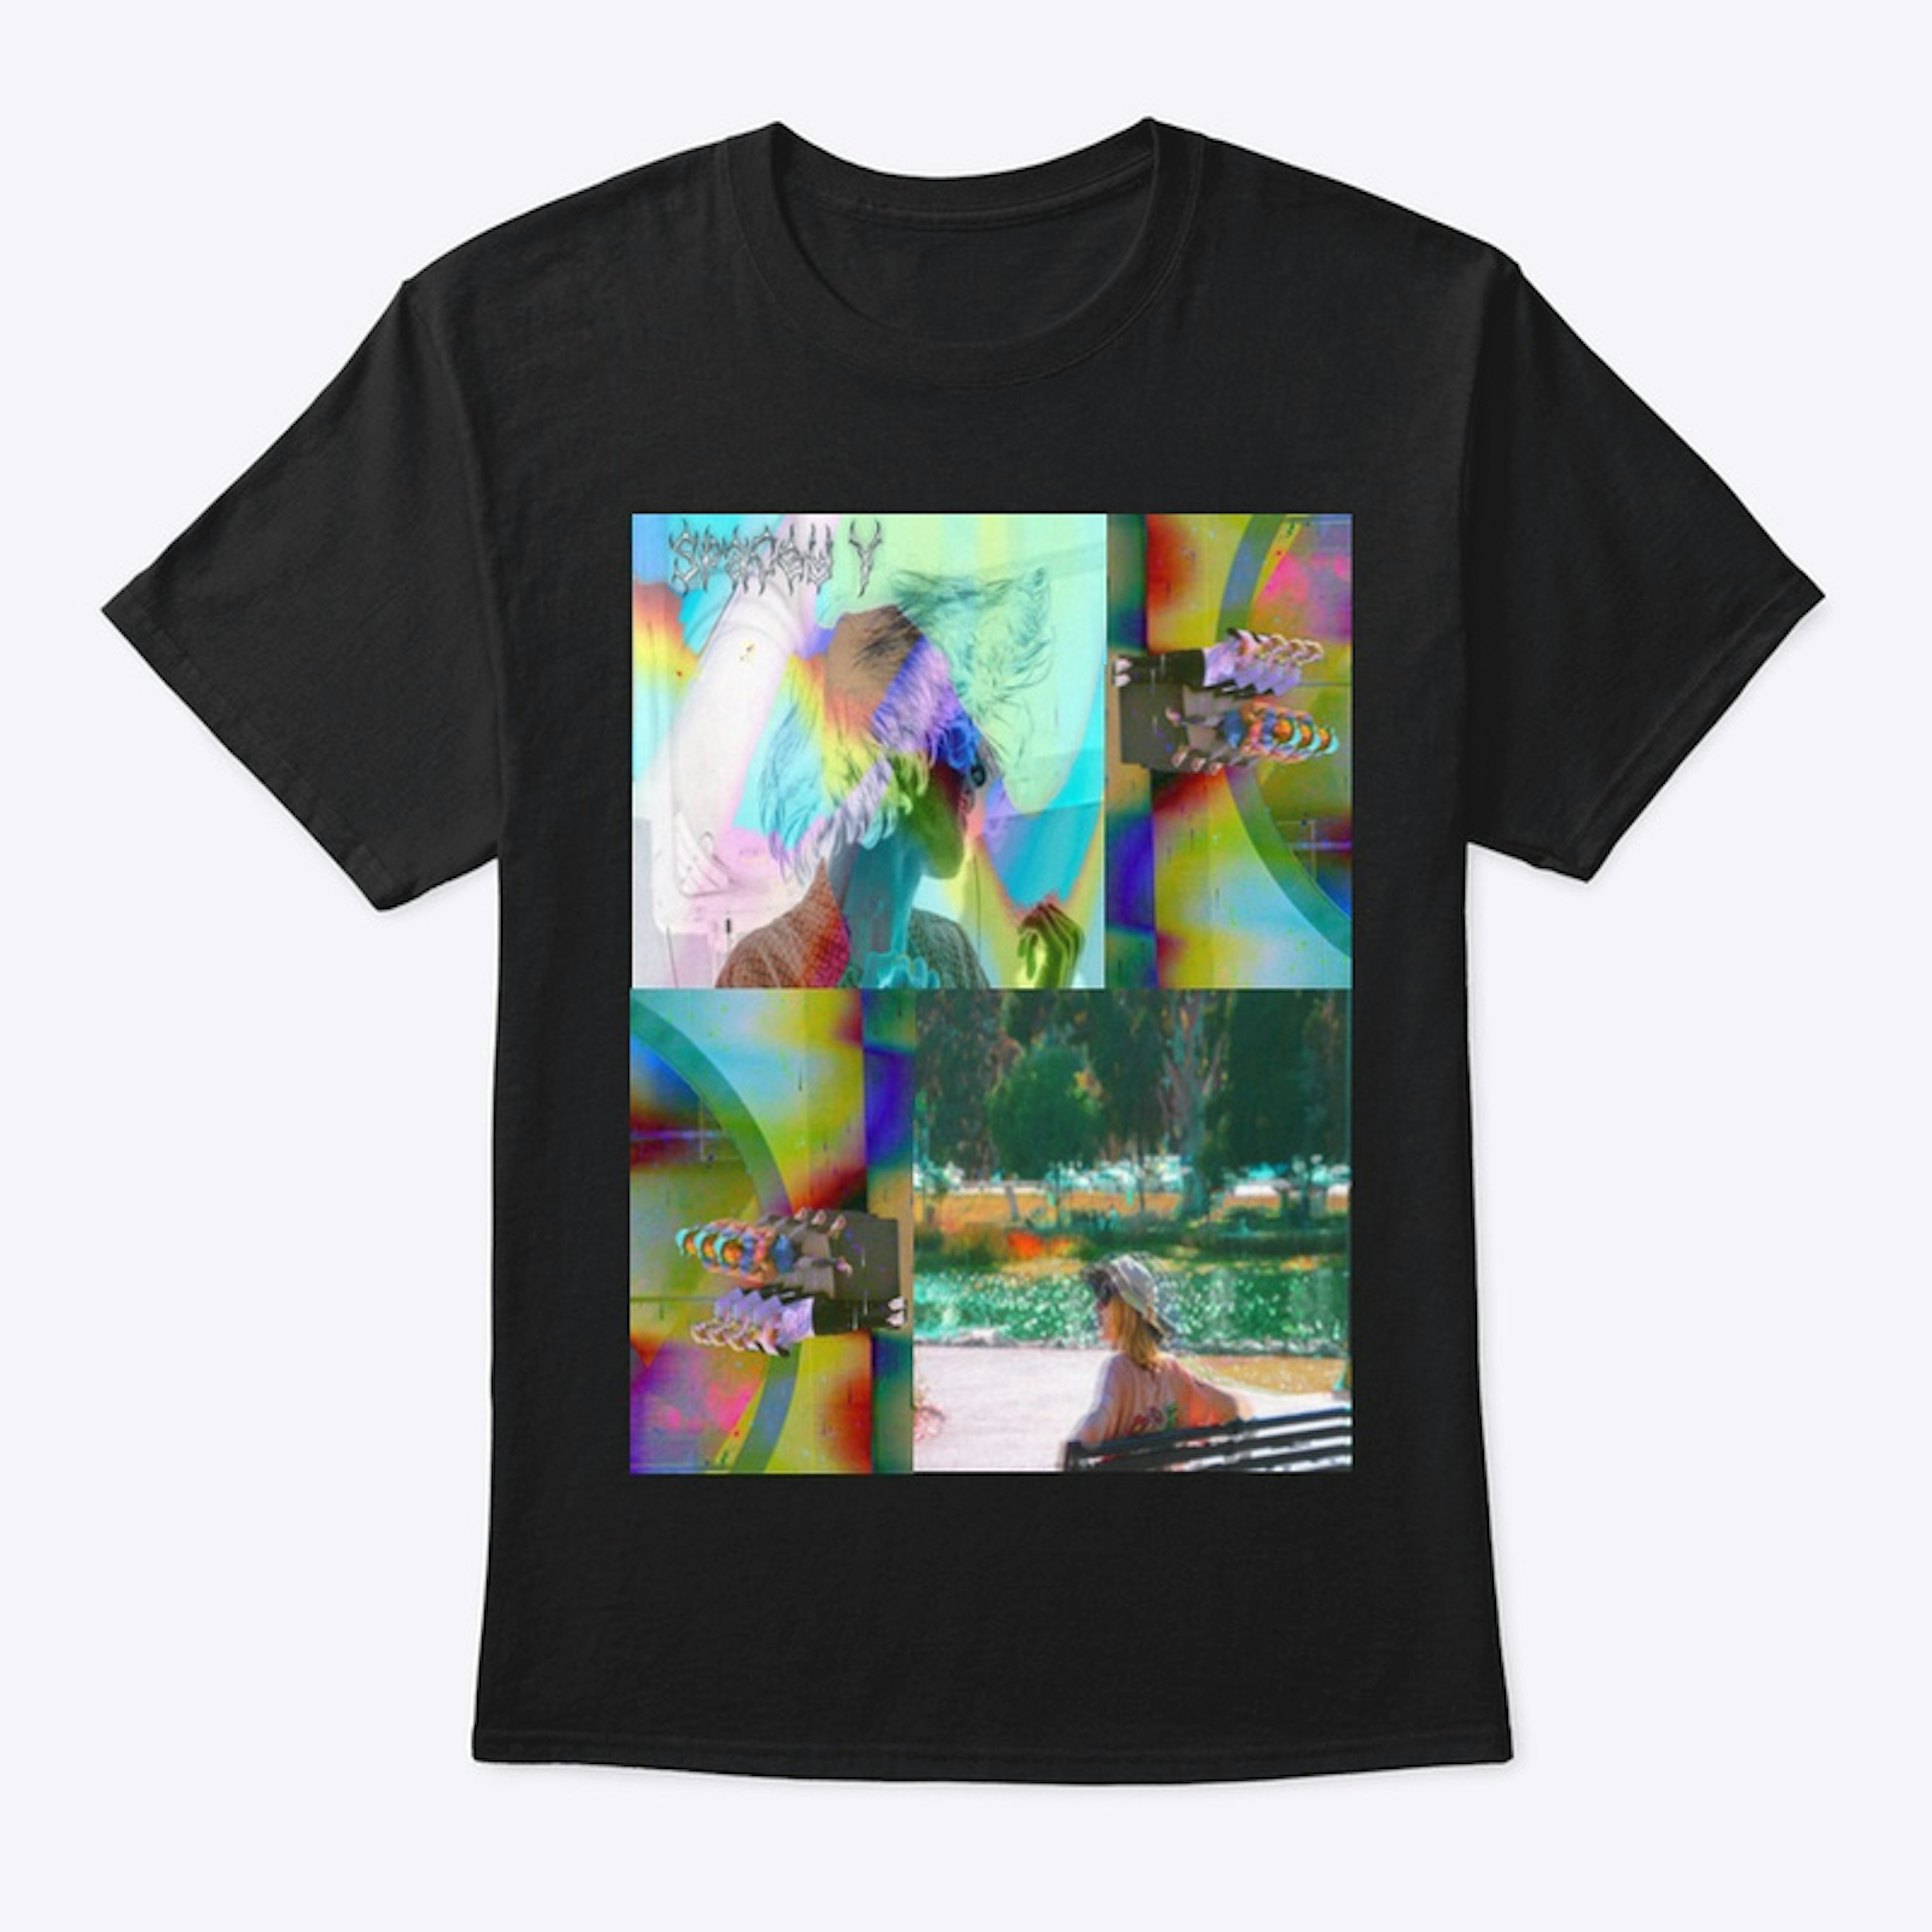 SpaceyY Collage Tee